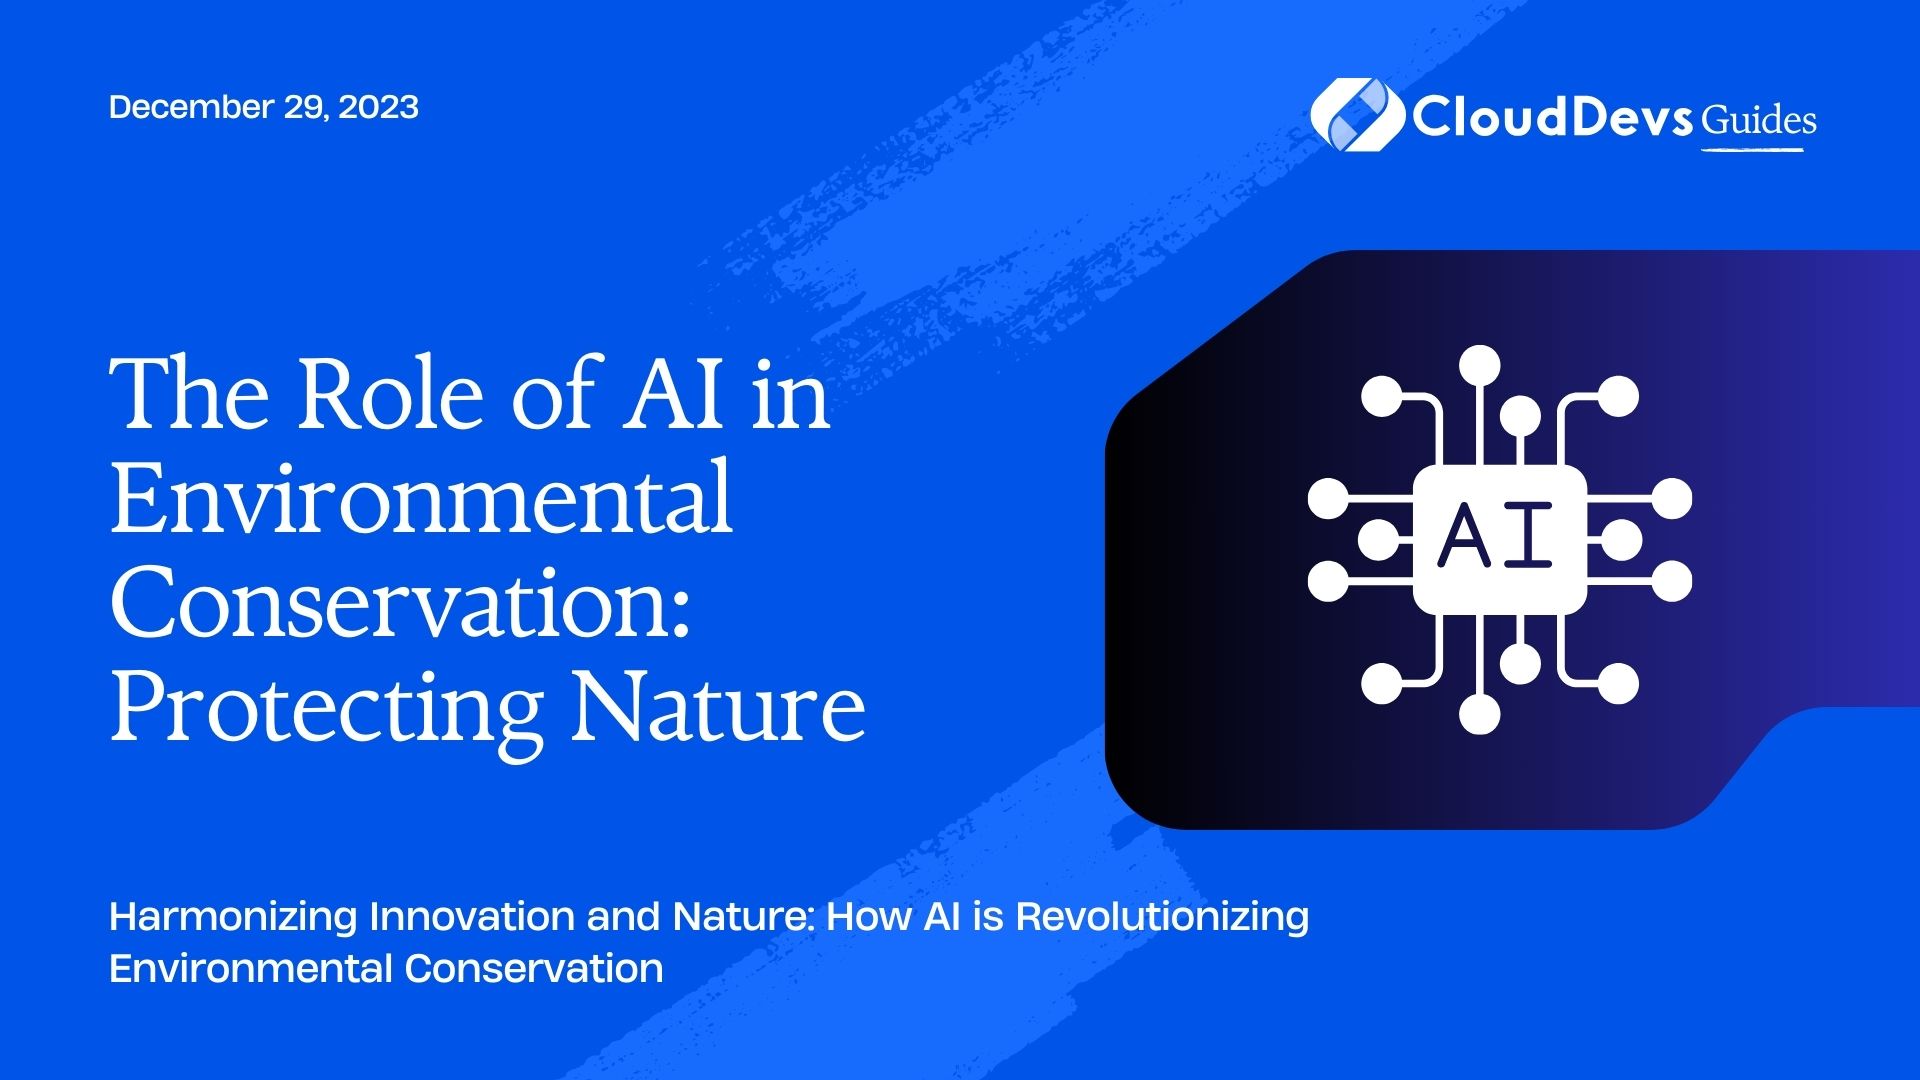 The Role of AI in Environmental Conservation: Protecting Nature